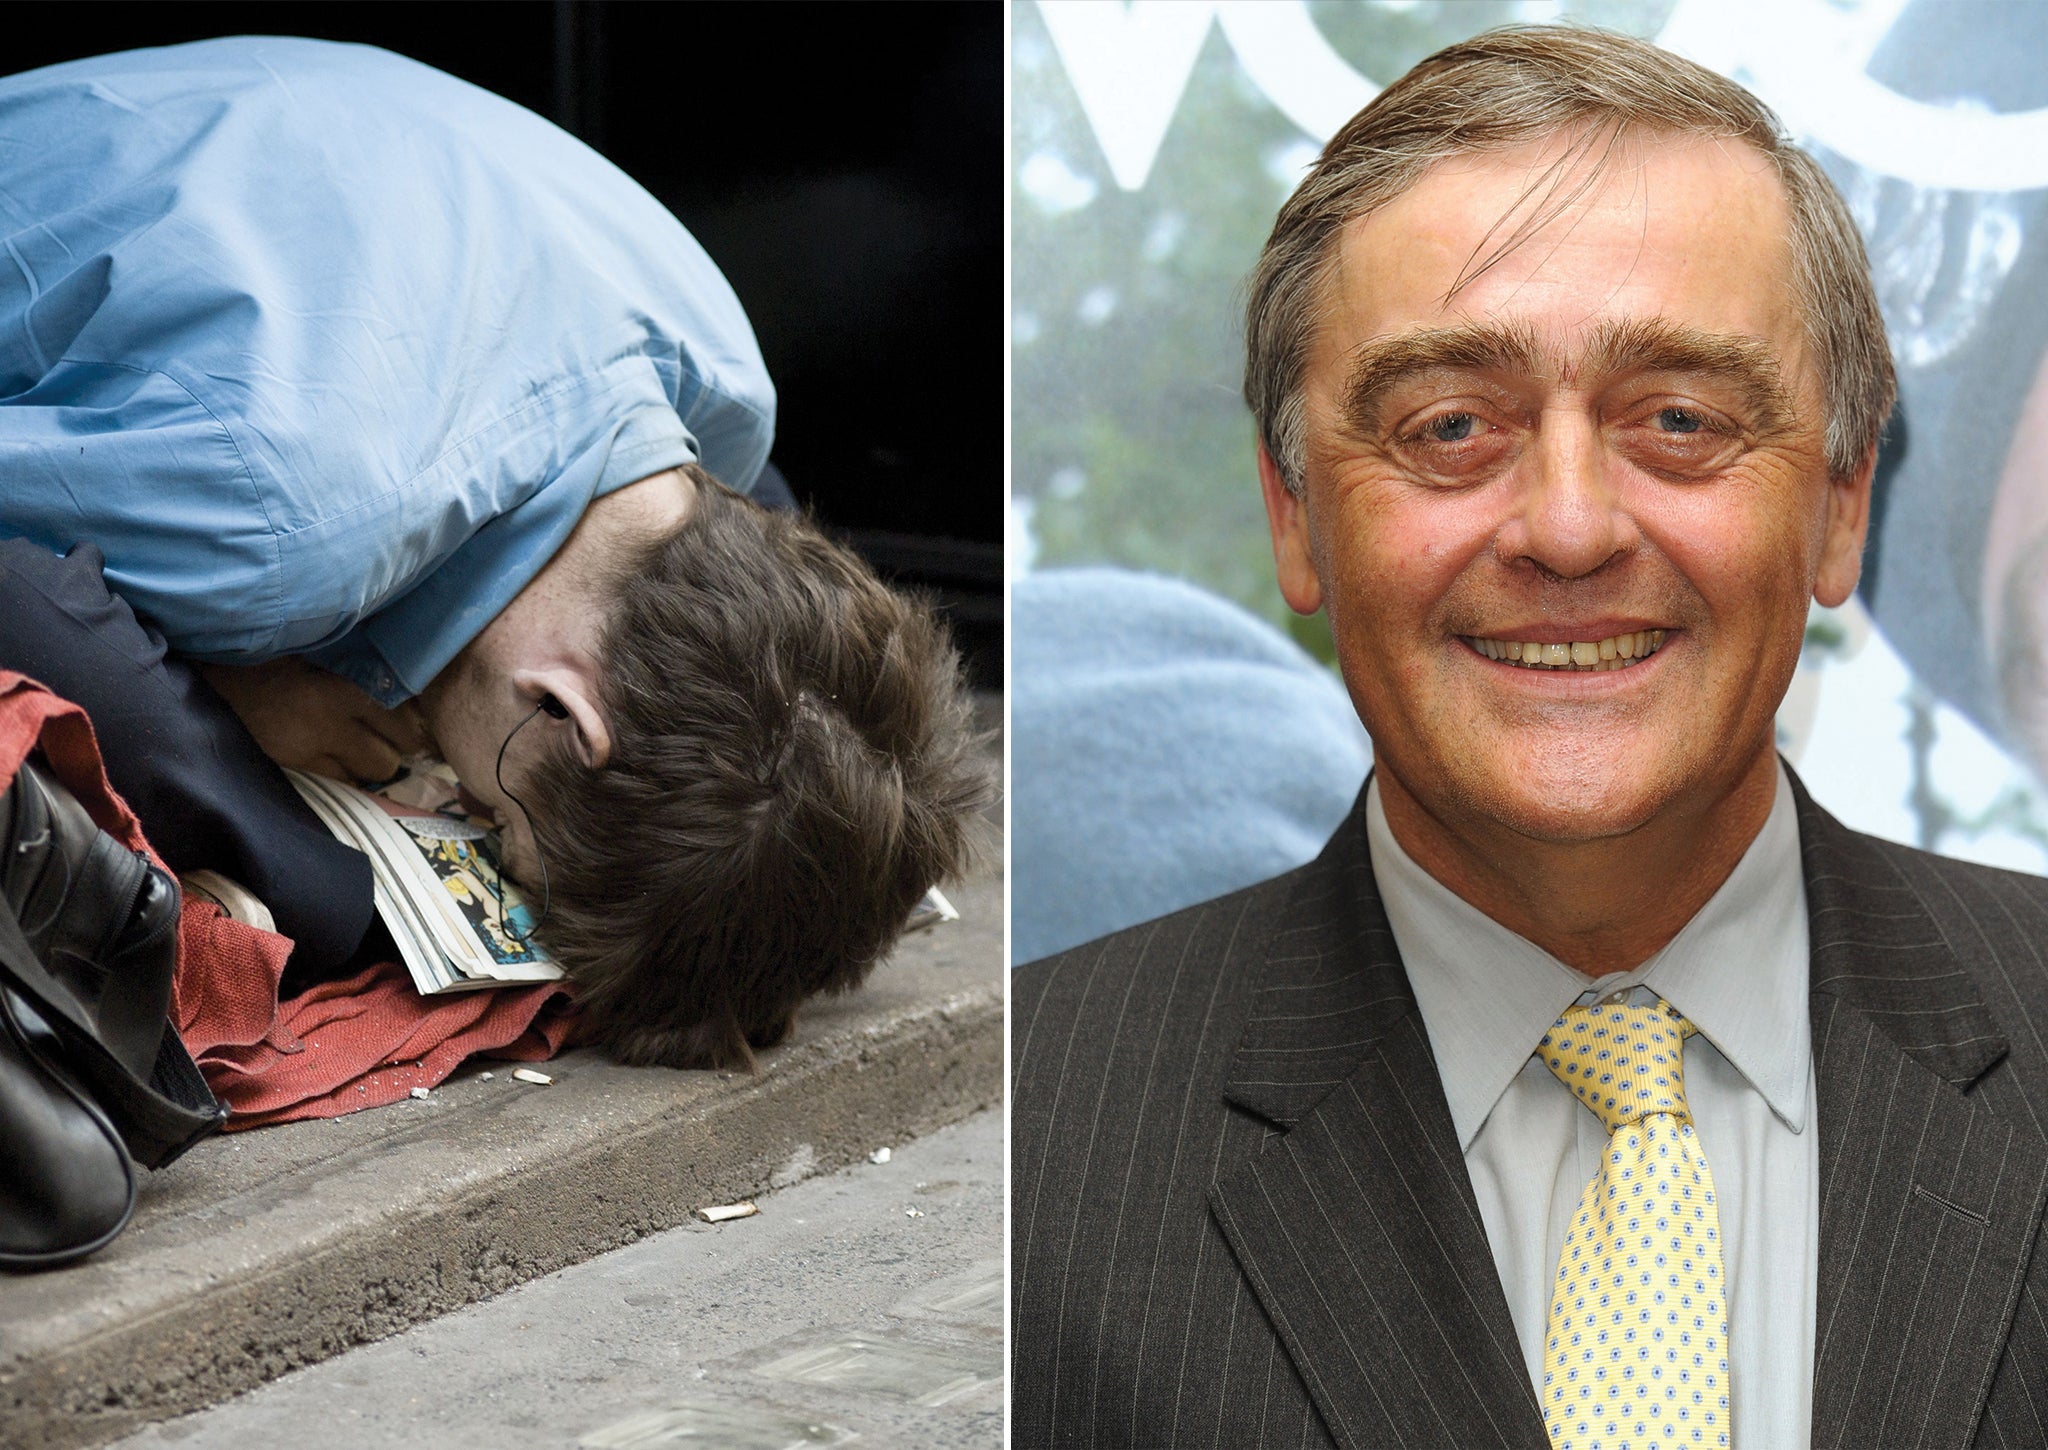 Left: A young homeless man, Right: Gerald Cavendish Grosvenor, who is as wealthy as the bottom 10 per cent of Britons